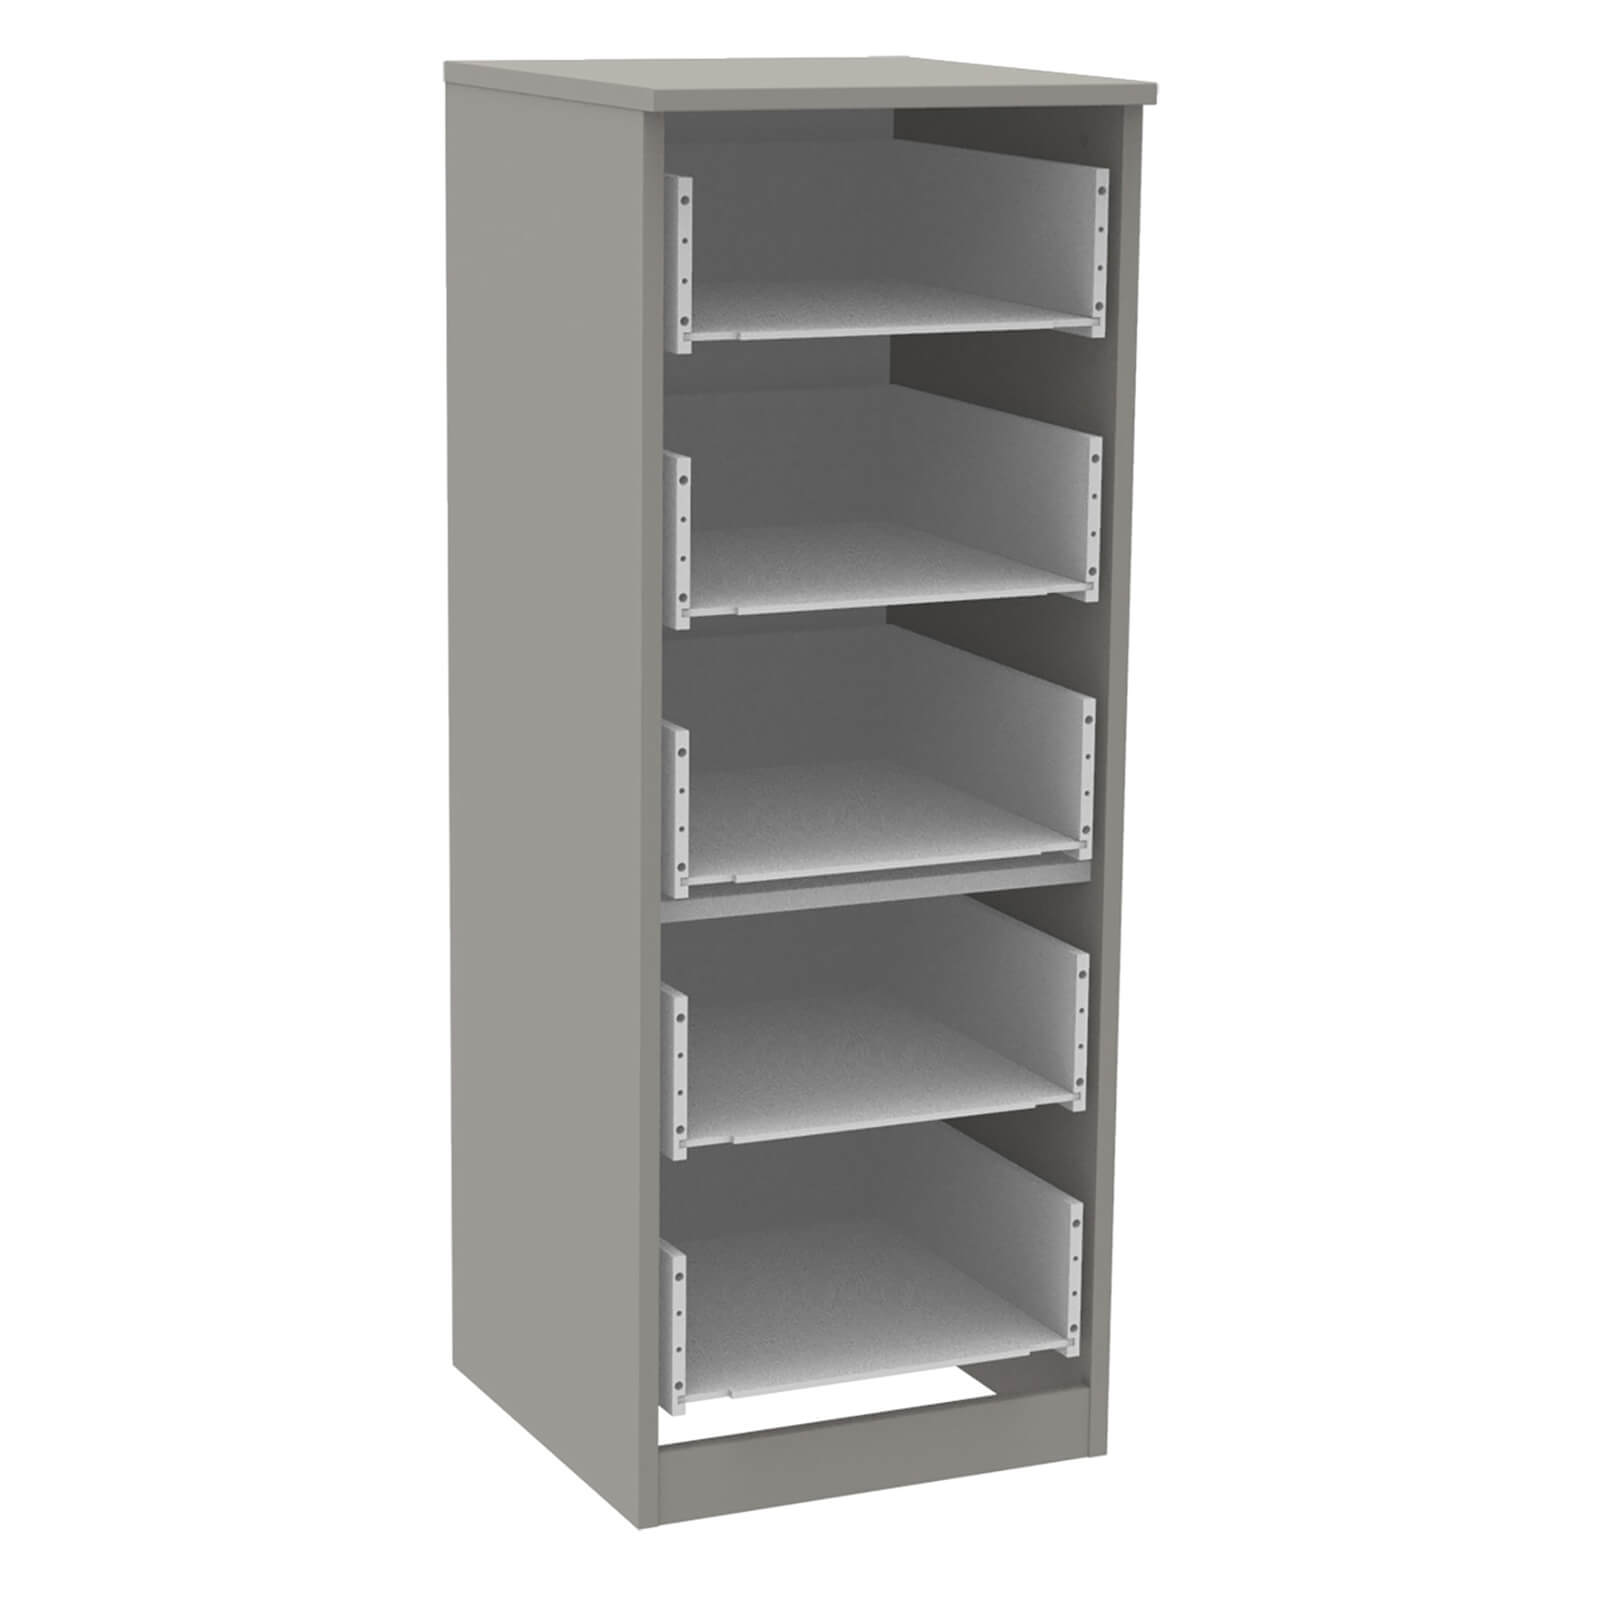 Fitted Bedroom 5 Drawer Narrow Chest - Grey